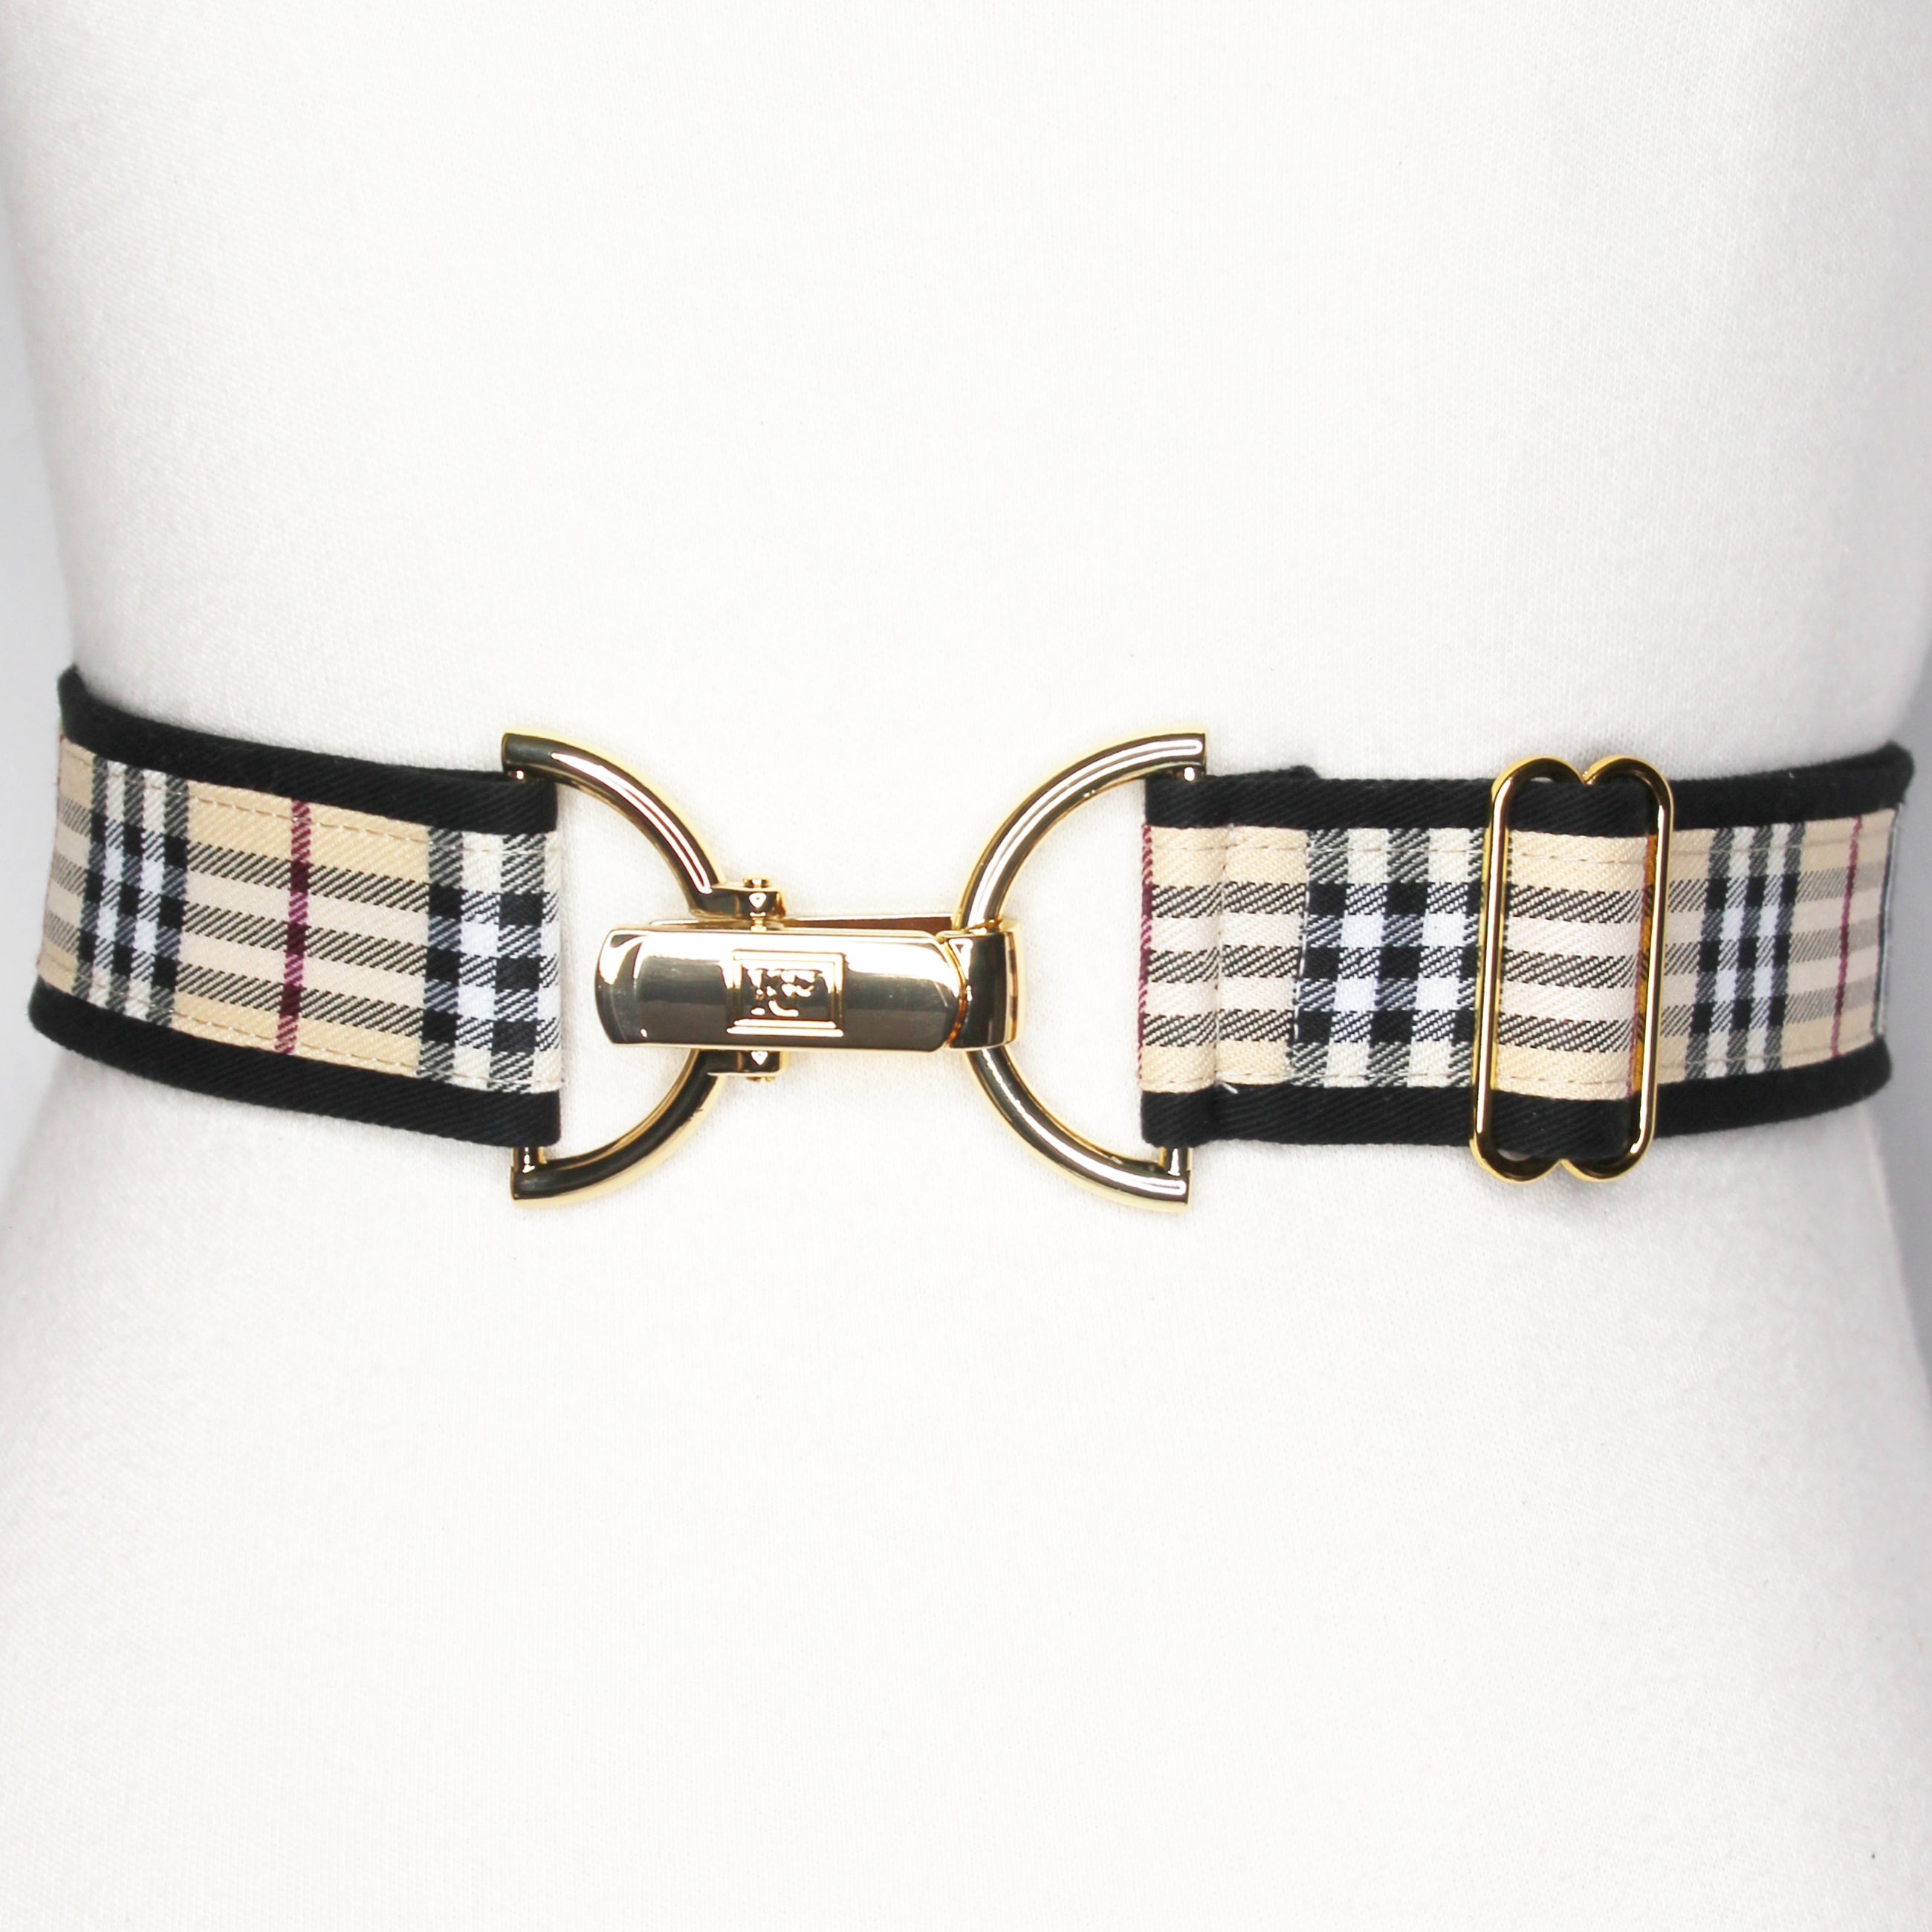 Tan plaid belt with 1.5" gold clip buckle by KF Clothing